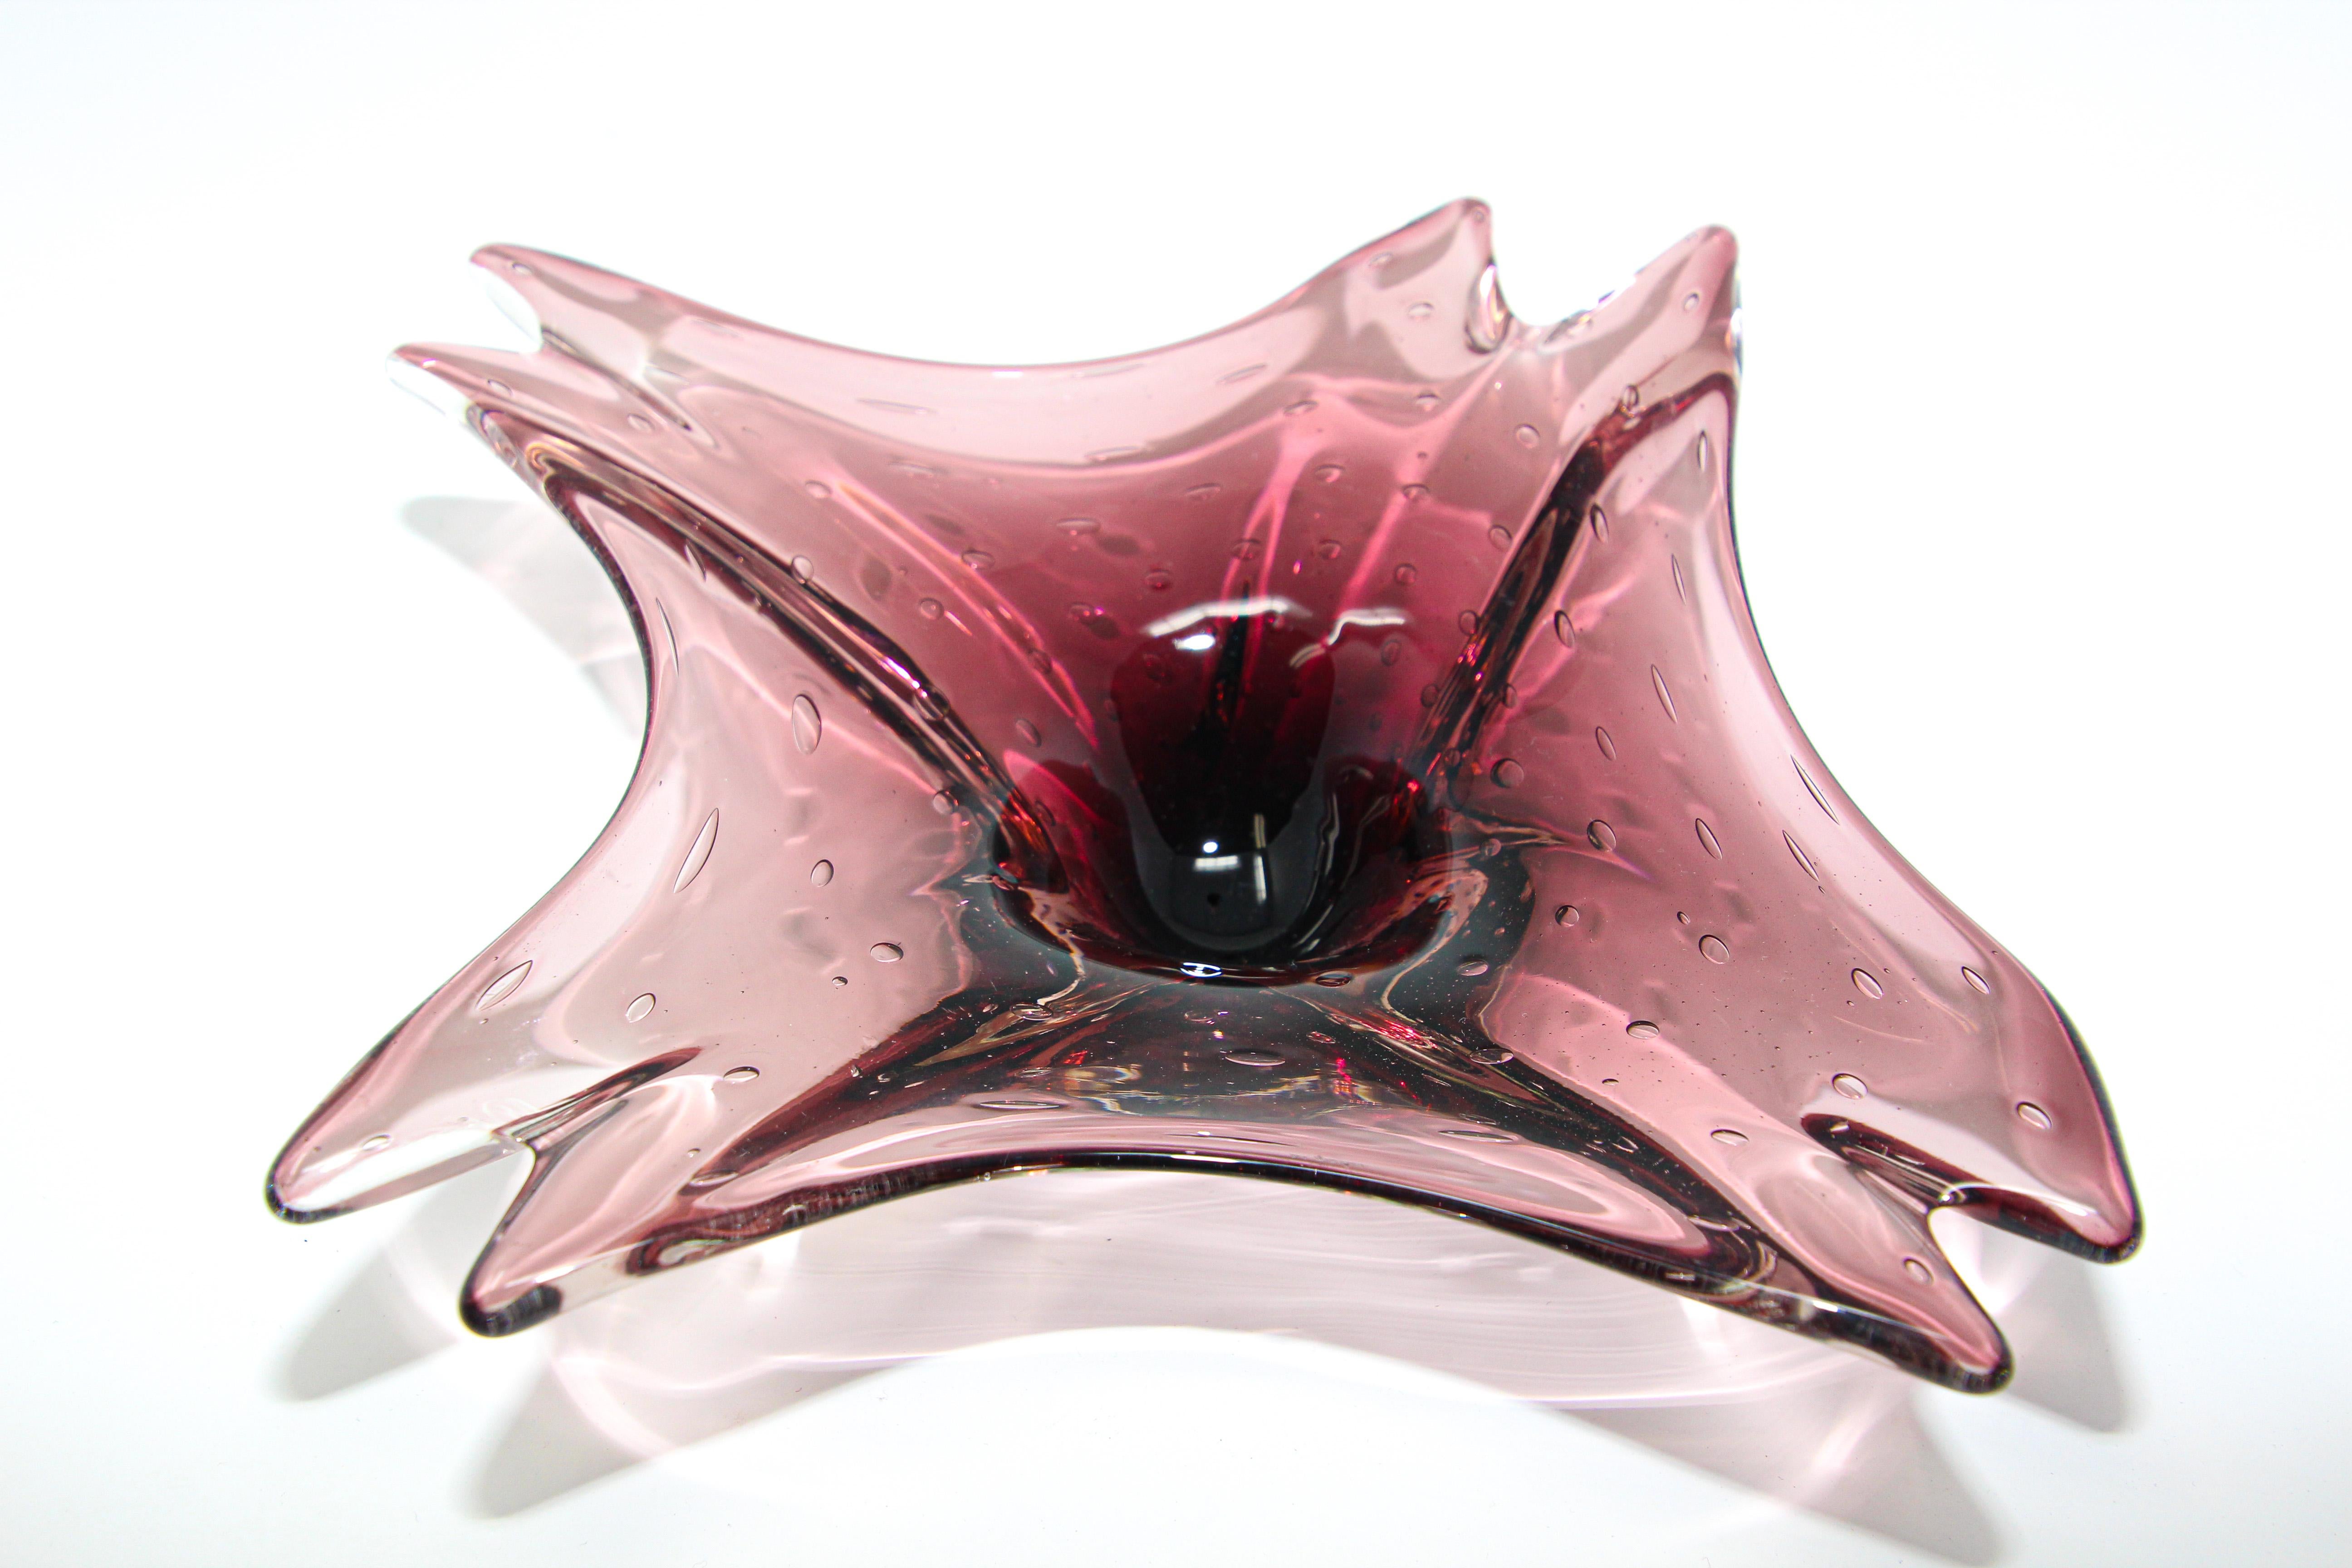 Decorative hand blown art glass lavender ashtray flower or catchall bowl.
Lavender mauve hand blow art glass with bubbles in Murano, Venini style.
Measures: 10” x 11” x 2.5” H.